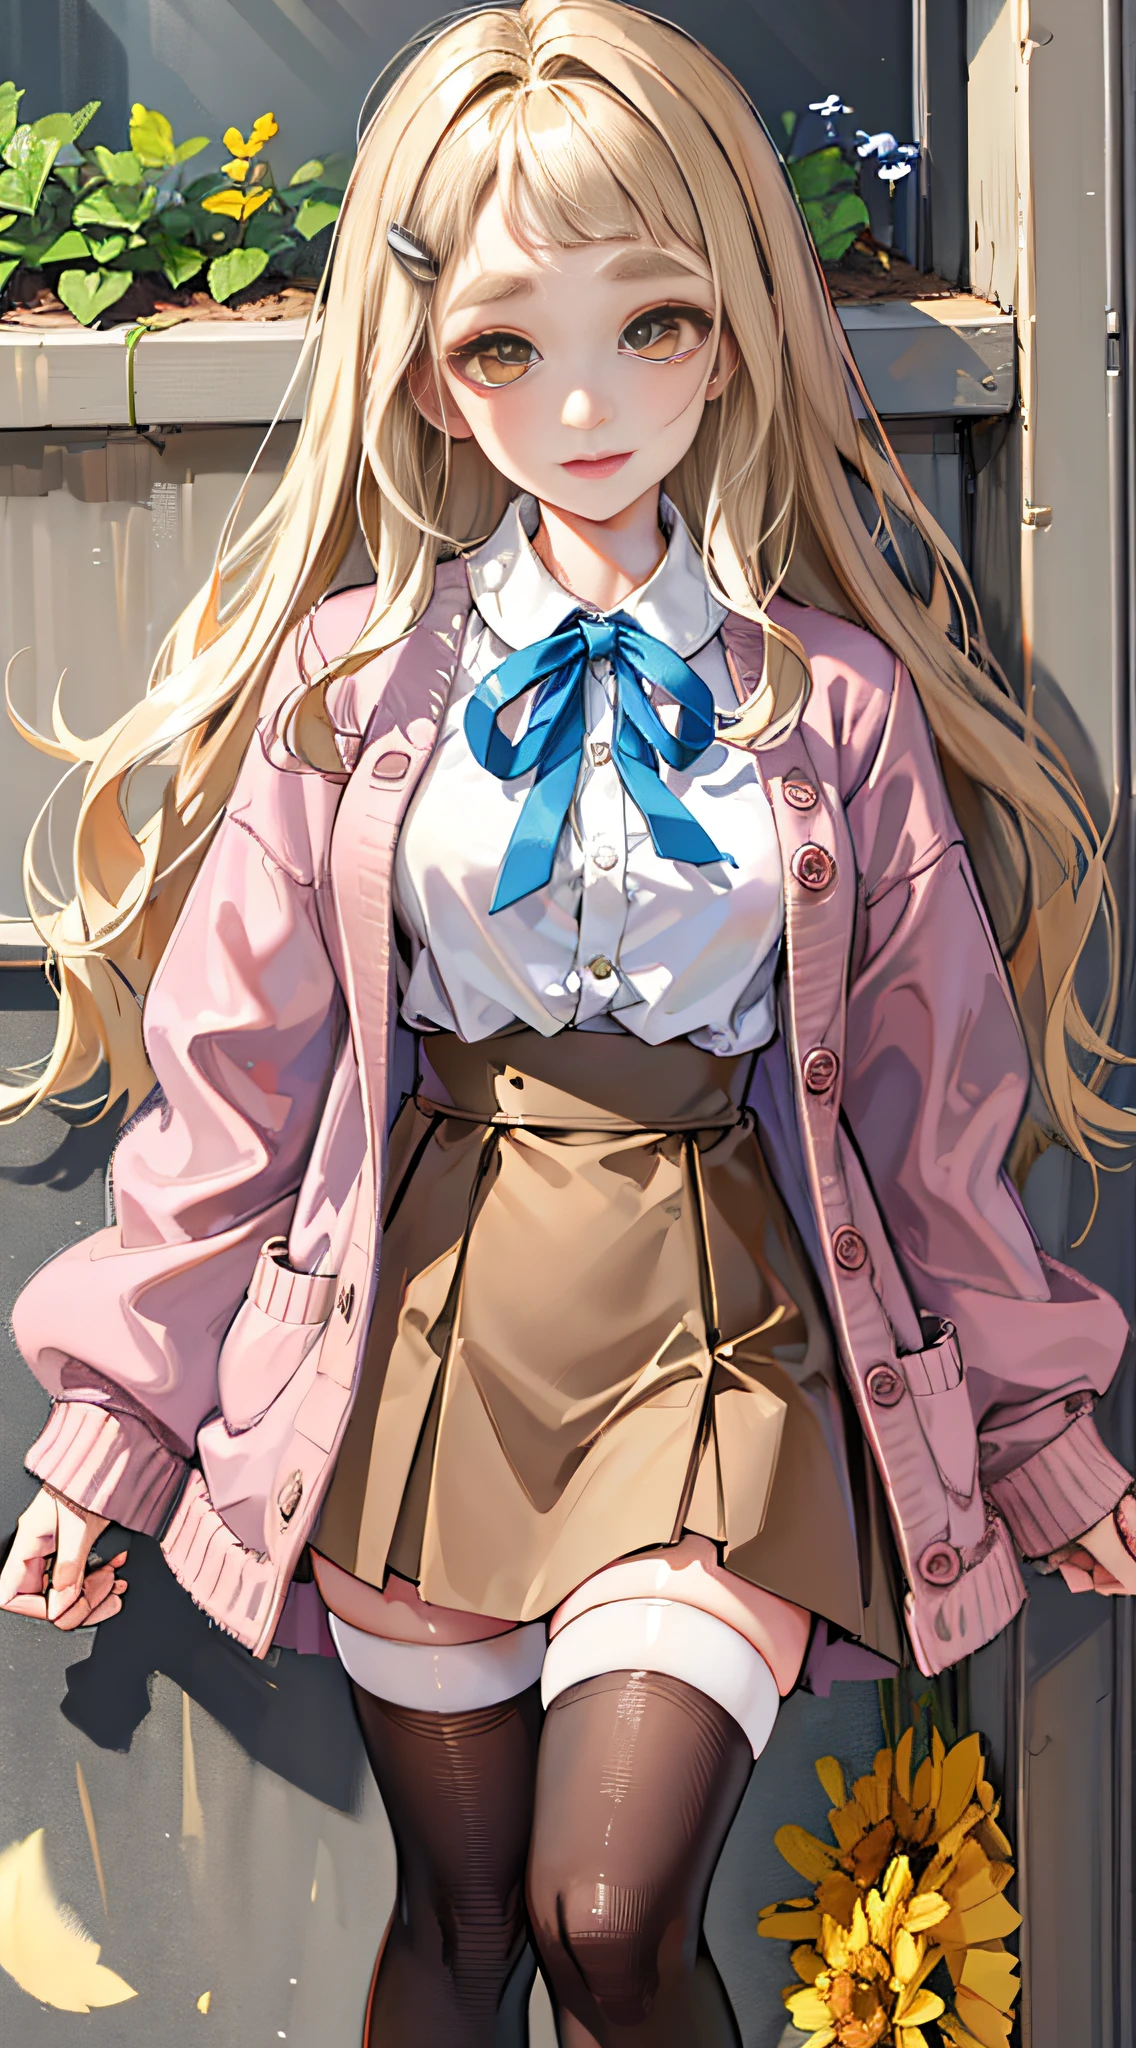 Masterpiece, Best Quality, High Resolution, 1girl, Virtual YouTuber, Skirt, Solo, Long Hair, Stockings, Shirt, Blonde, Brown Skirt, White Shirt, Ribbon, Neckband, White Stockings, Sleeves Over the Wrist, Collared Shirt, Thick Eyebrows, Hair Accessories Long Sleeves Extra Long Hair Blue Ribbon Cardigan Cardigan Bangs Cardigan Pink Cardigan Jacket Yellow Eyes Pleated Skirt Shirt Tuck In Wavy Hair High Waist Skirt Pink Jacket Cardigan Standing, Denim Shooting, Outdoor,